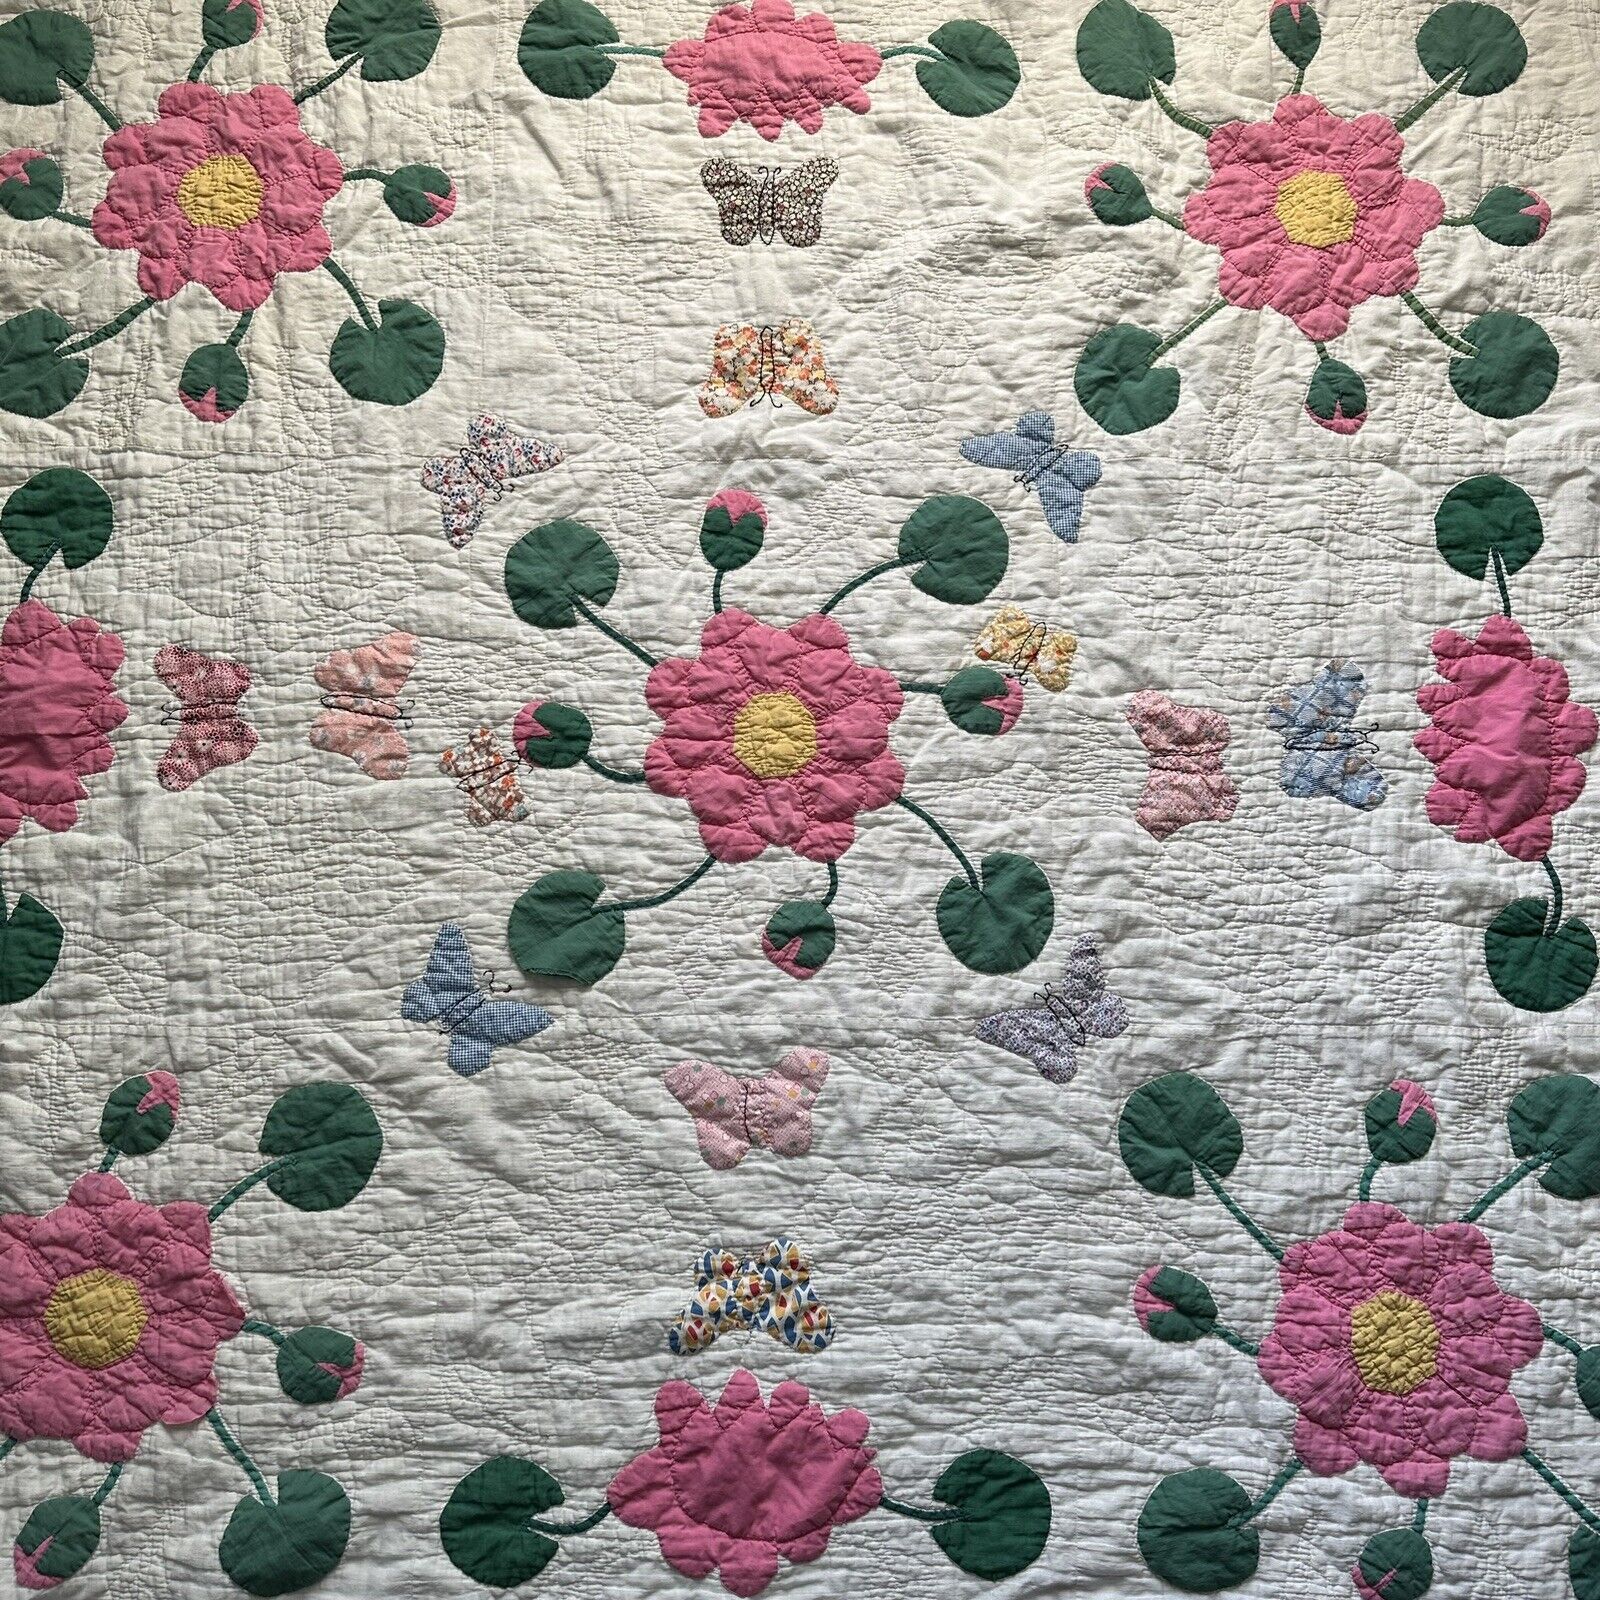 Vintage Butterfly & Rose of Sharon Appliqué Quilt Feed Sack Hand Sewn 69” X 78”